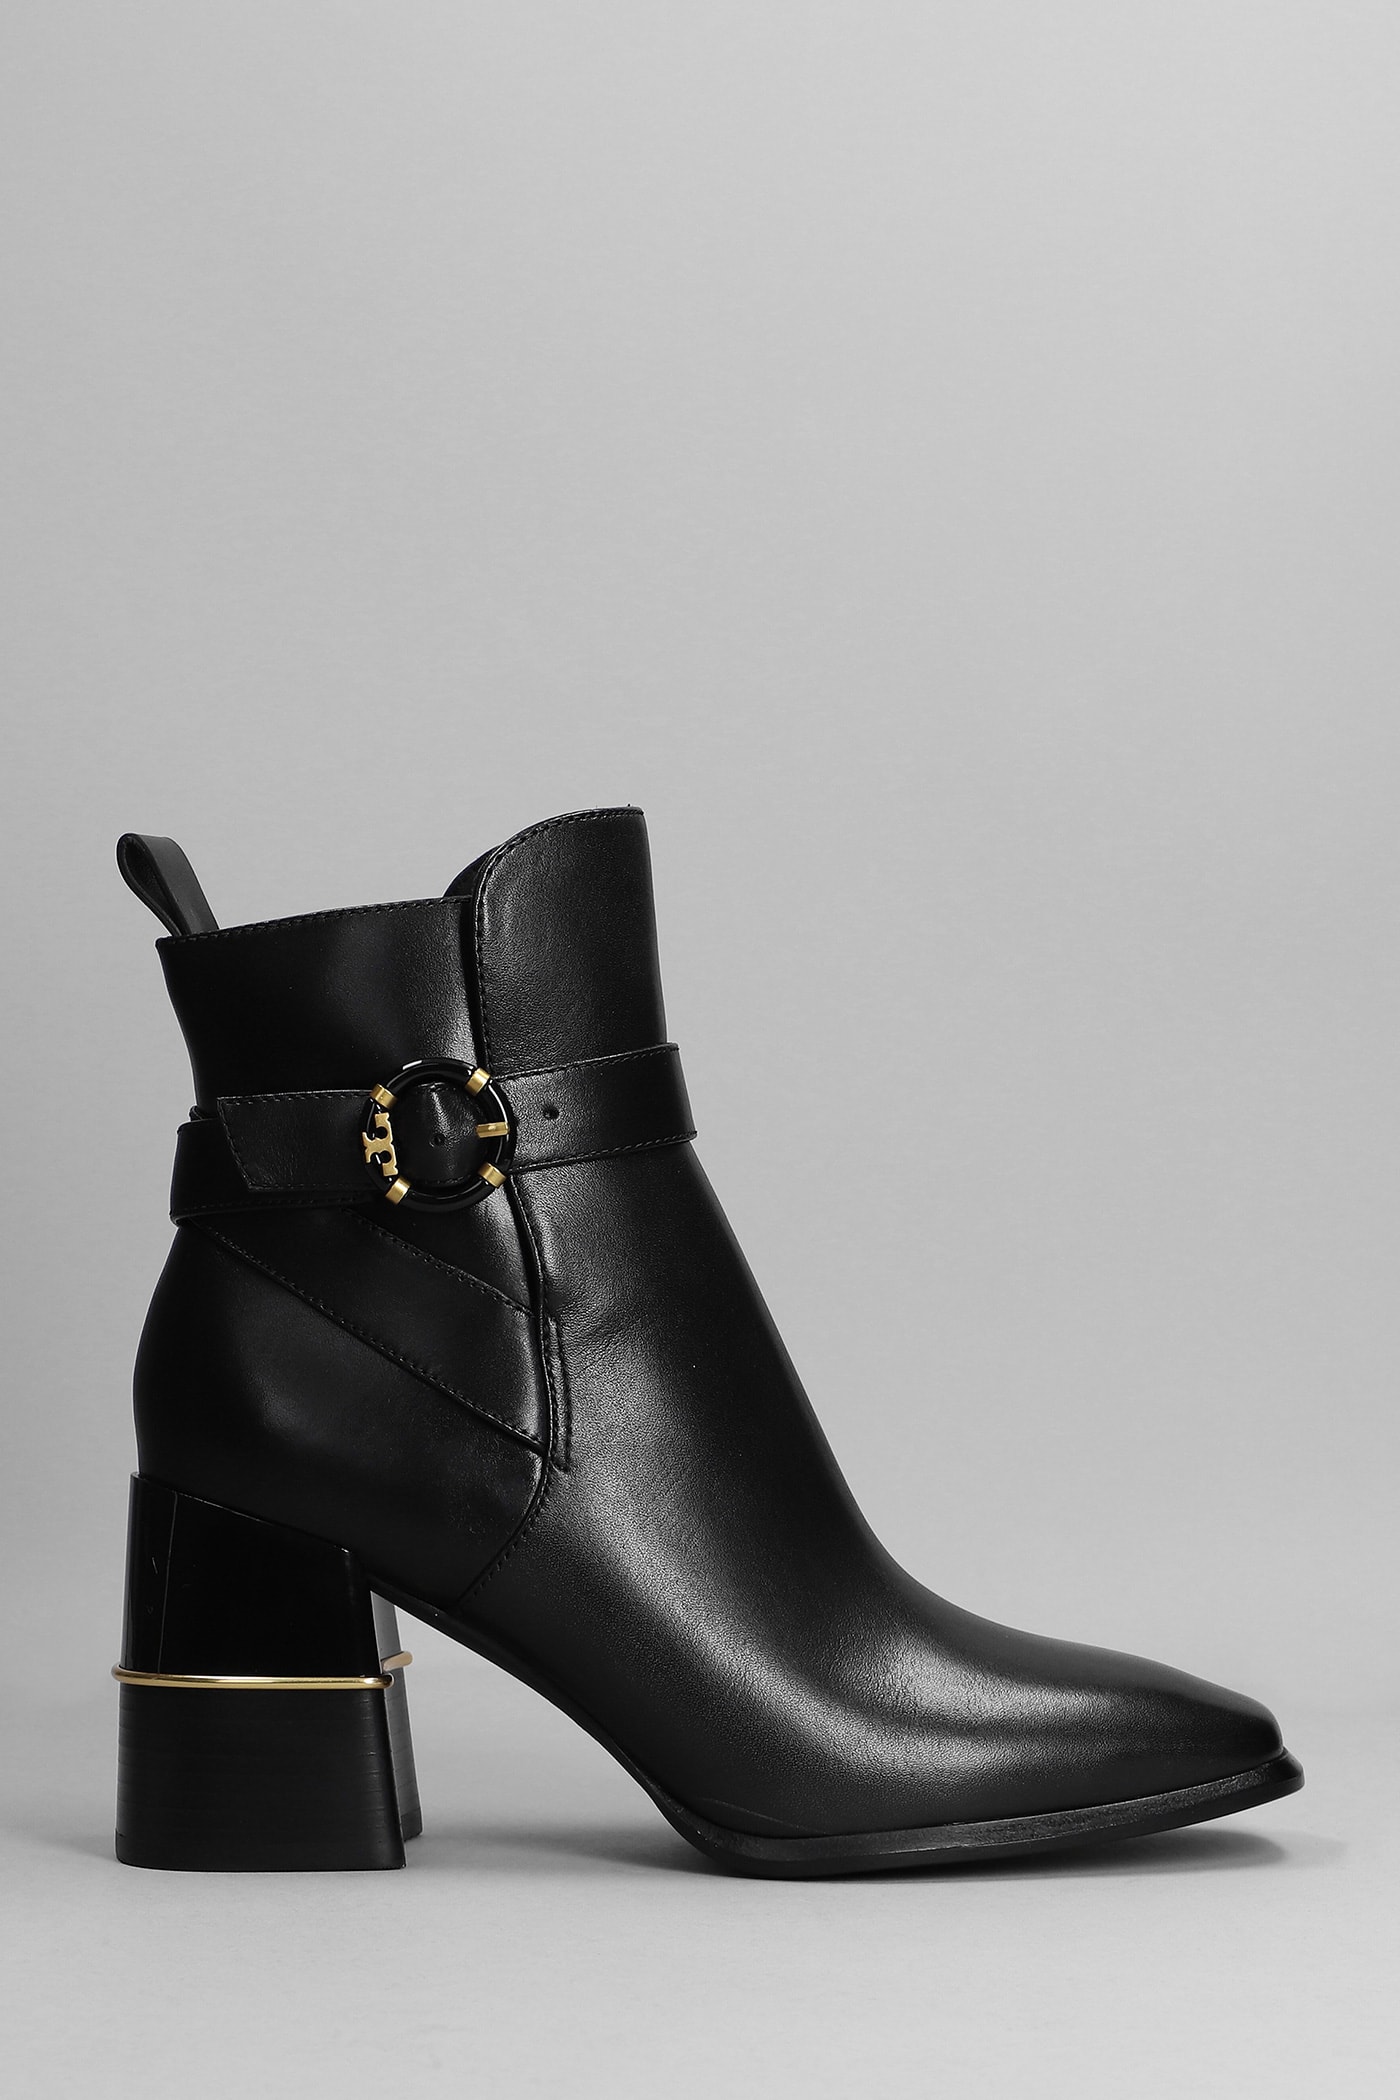 Tory Burch High Heels Ankle Boots In Black Leather